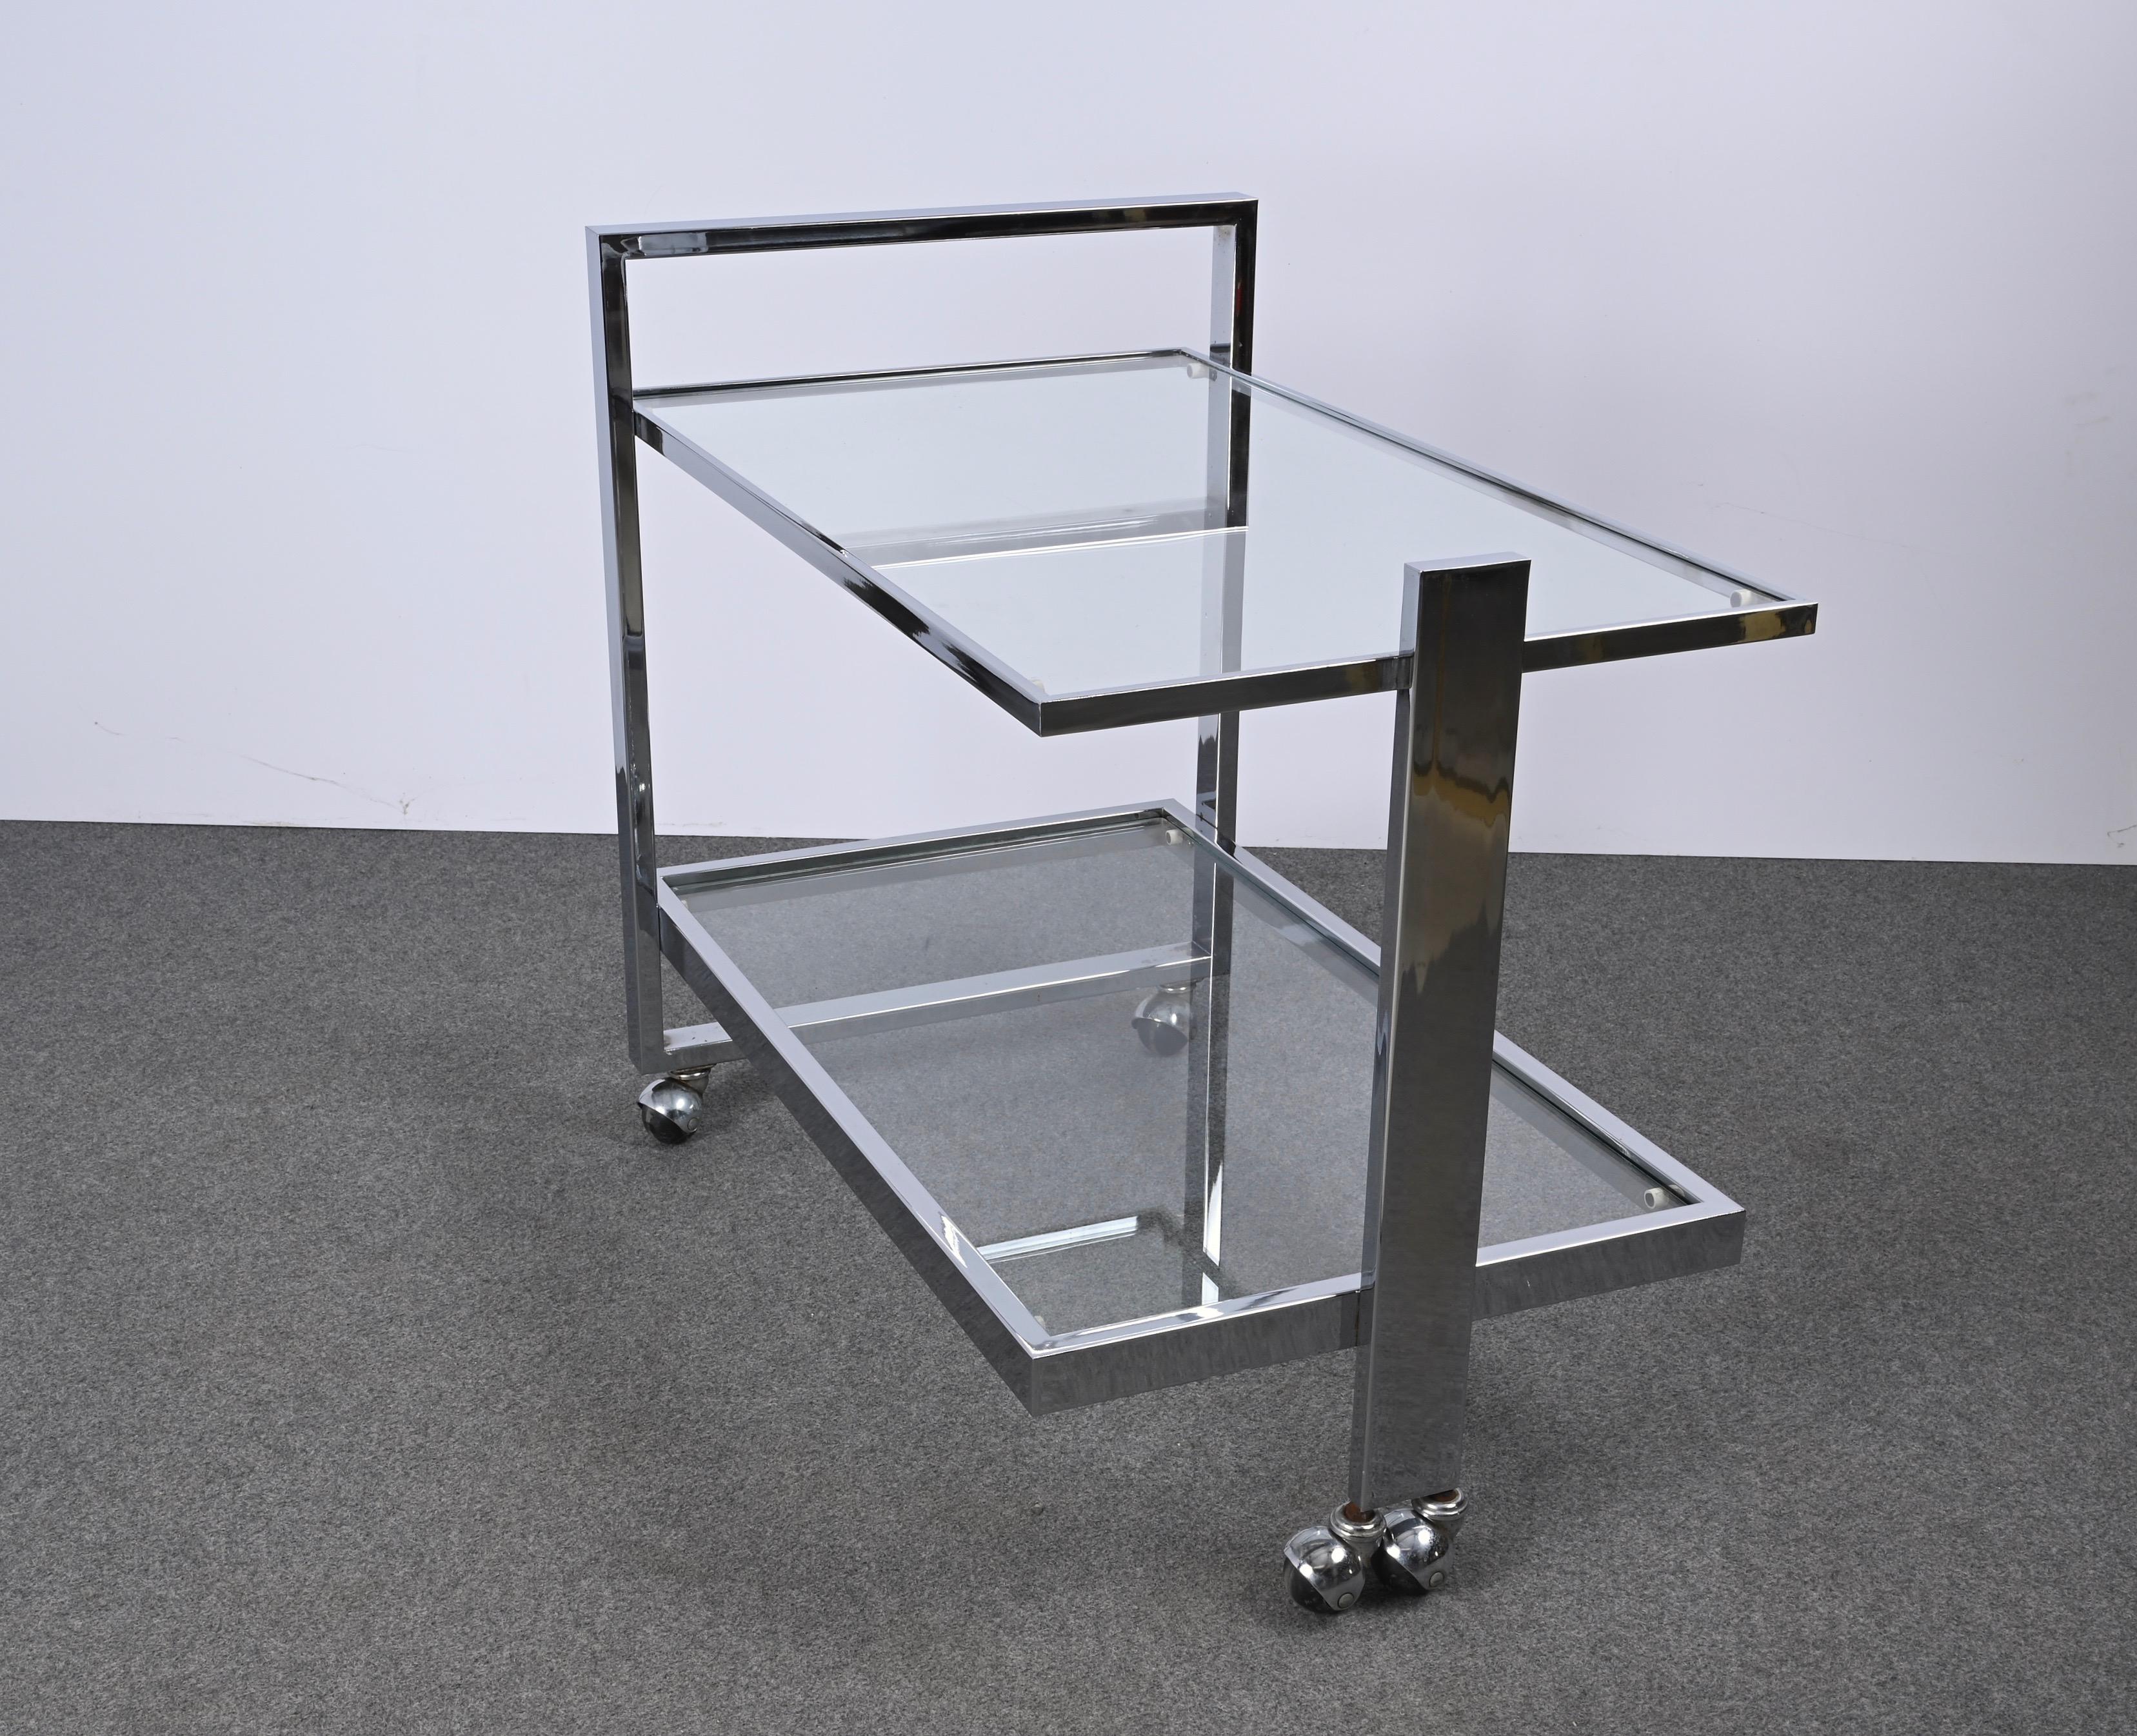 Beautiful midcentury bar cart in chrome steel and crystal glass with serving tray. This wonderful article was produced in Italy during the 1970s.

This piece is gorgeous as it has a shiny chrome frame with deep crystal glass trays. The two shelves